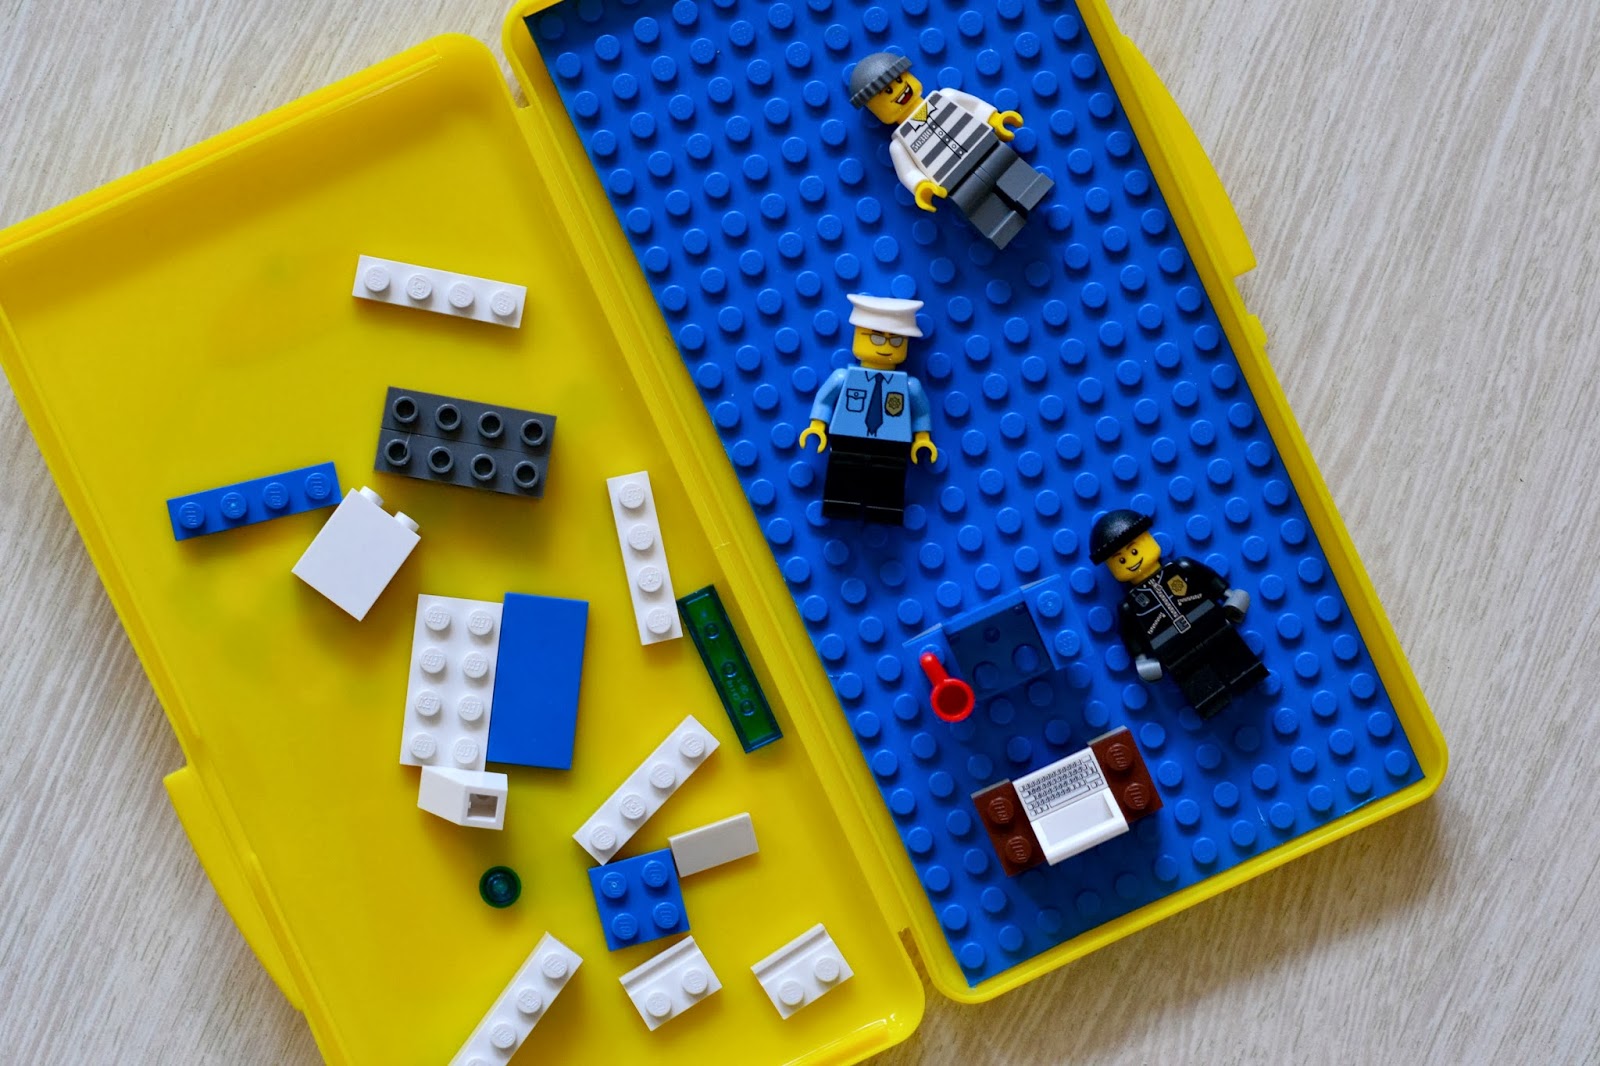 DIY Travel Lego Case, What to do with old baby wipes cases, DIY Lego 